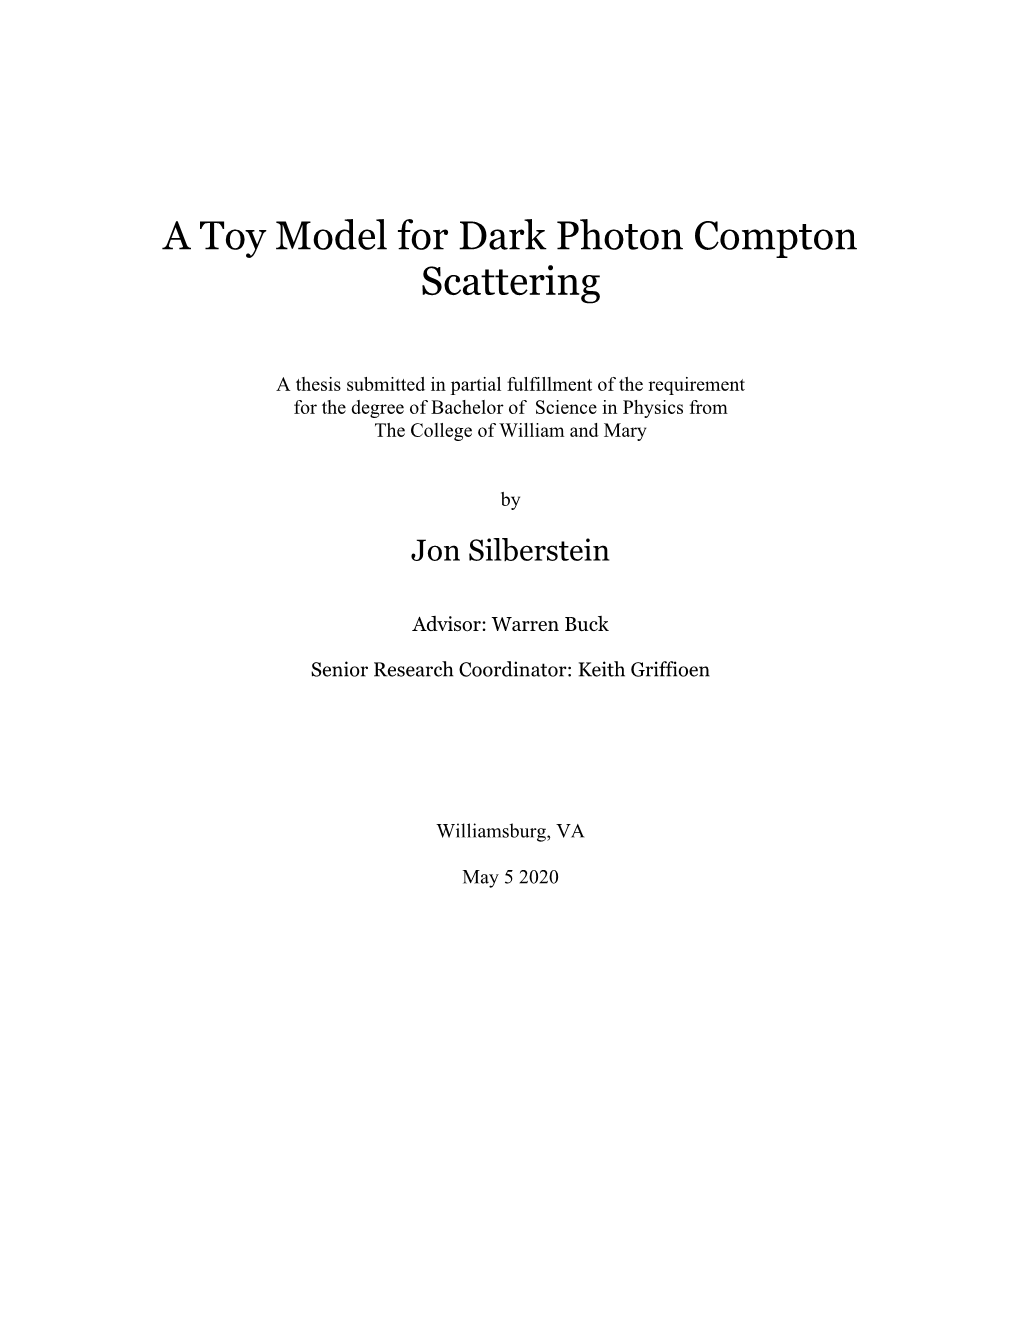 A Toy Model for Dark Photon Compton Scattering